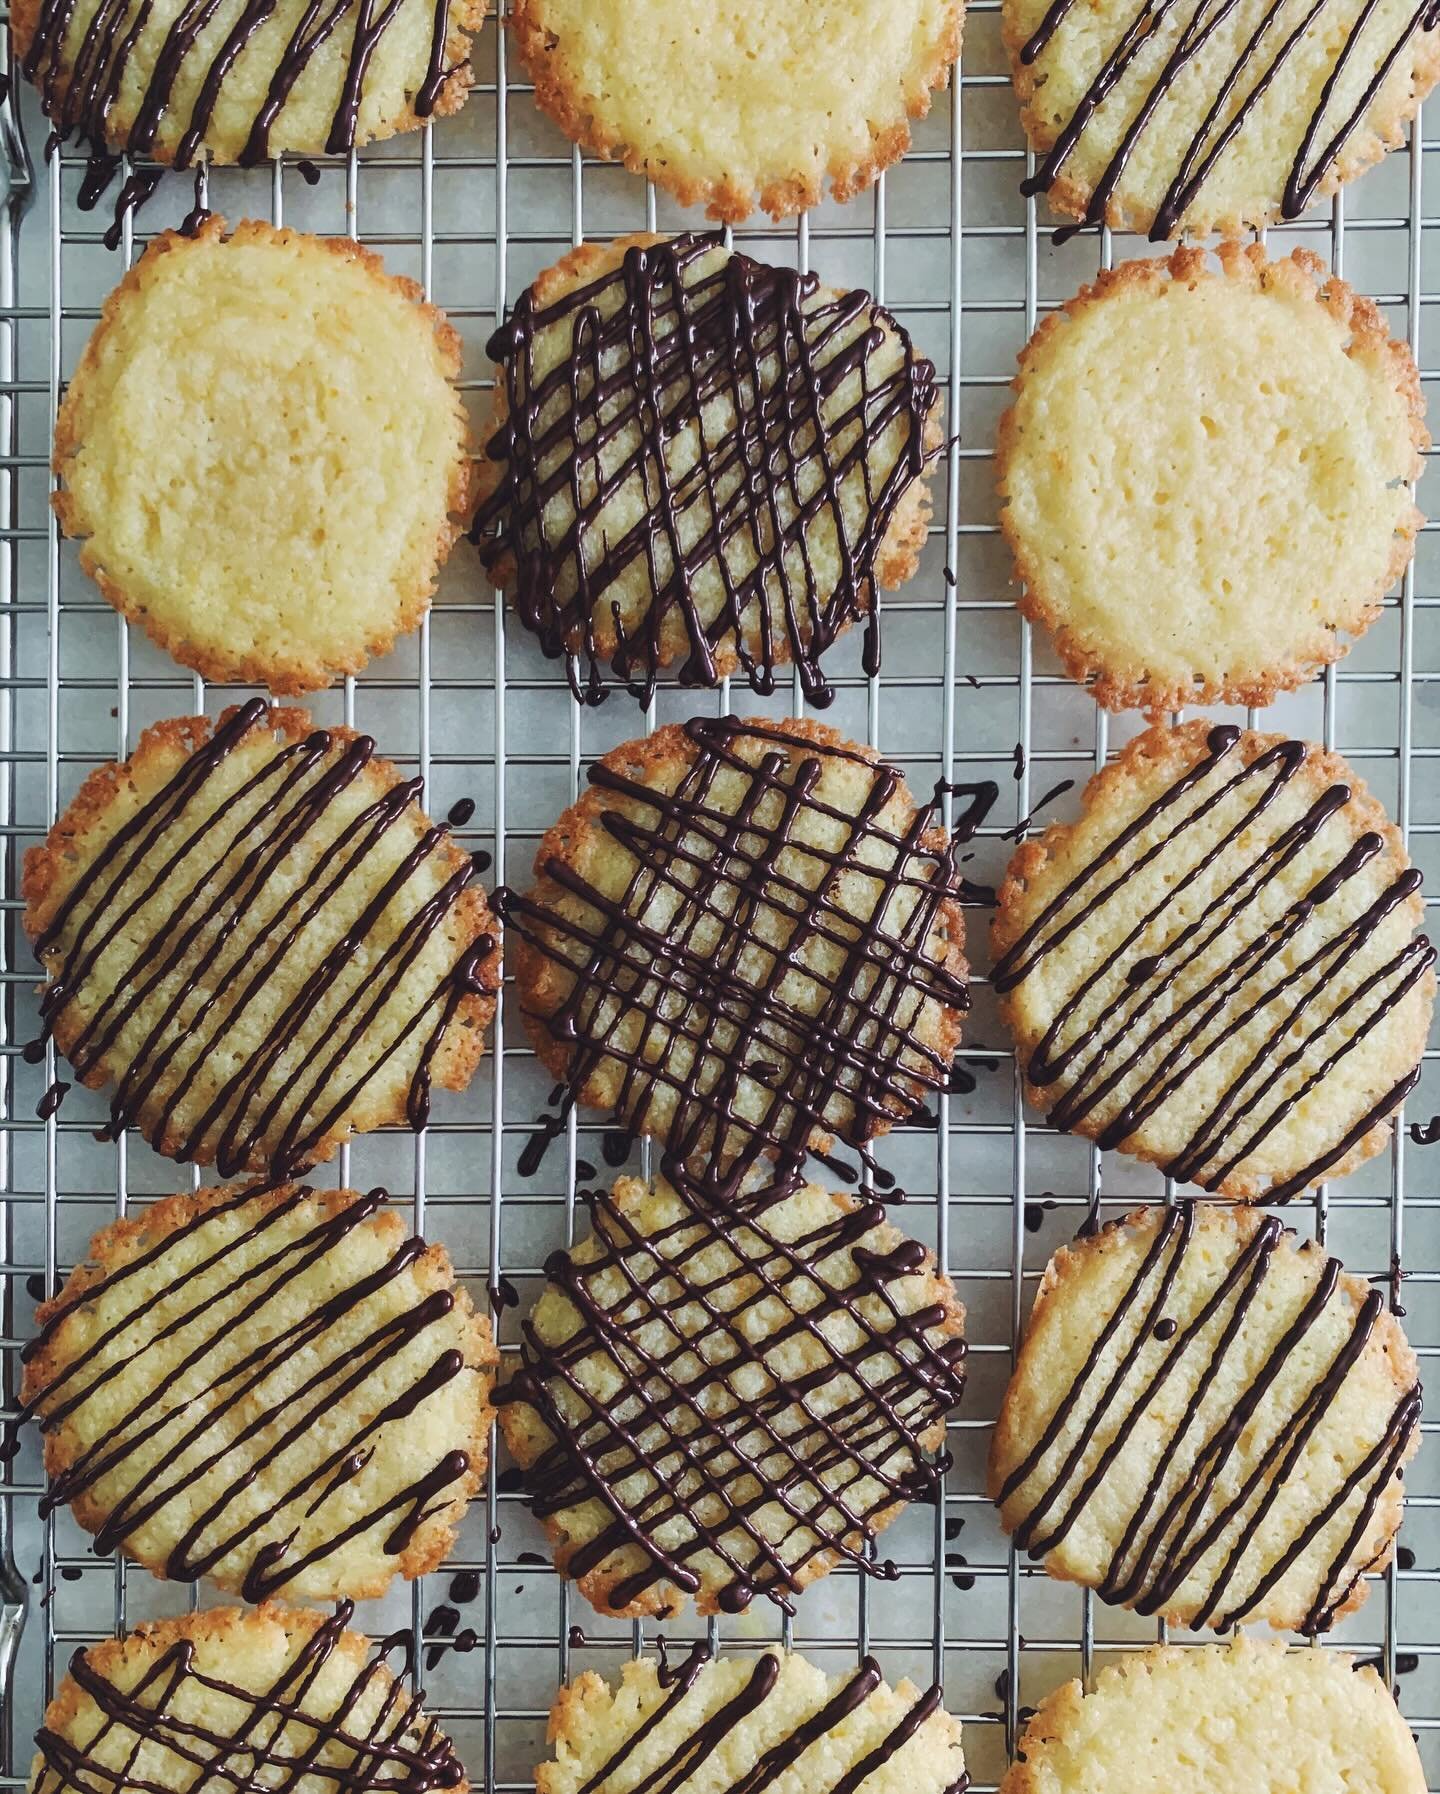 @thepastrysuffragette made me do it 😄
Biscotti al burro e mascarpone con cioccolato fondente 🧈☁️🍫
.
These are lovely ~ lacy and a bit chewy, perfumed with orange zest (I added a splash of of vanilla, too).
.
Recipe is on @thepastrysuffragette&rsqu